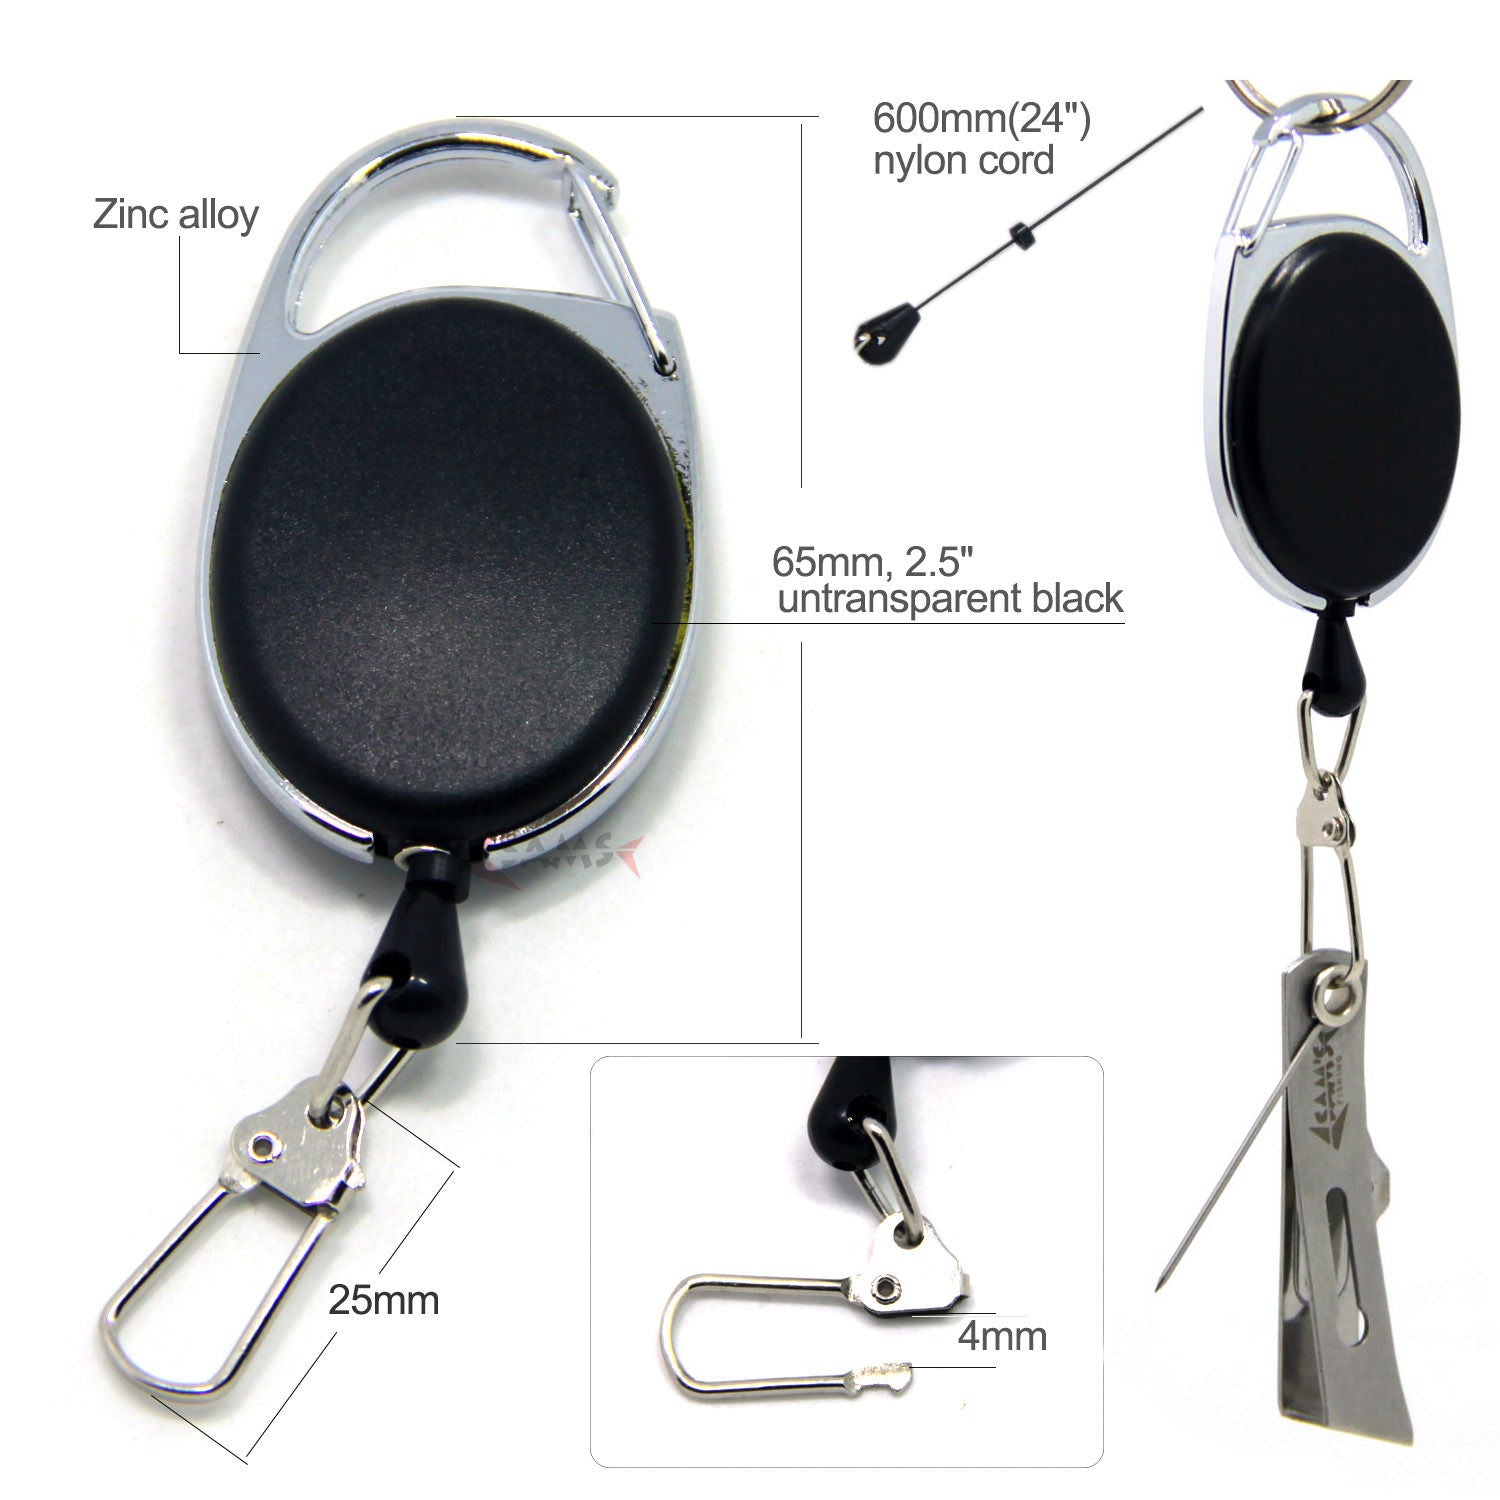 Fly Fishing Zinger Retractor 1PCS Stainless Steel Pin On